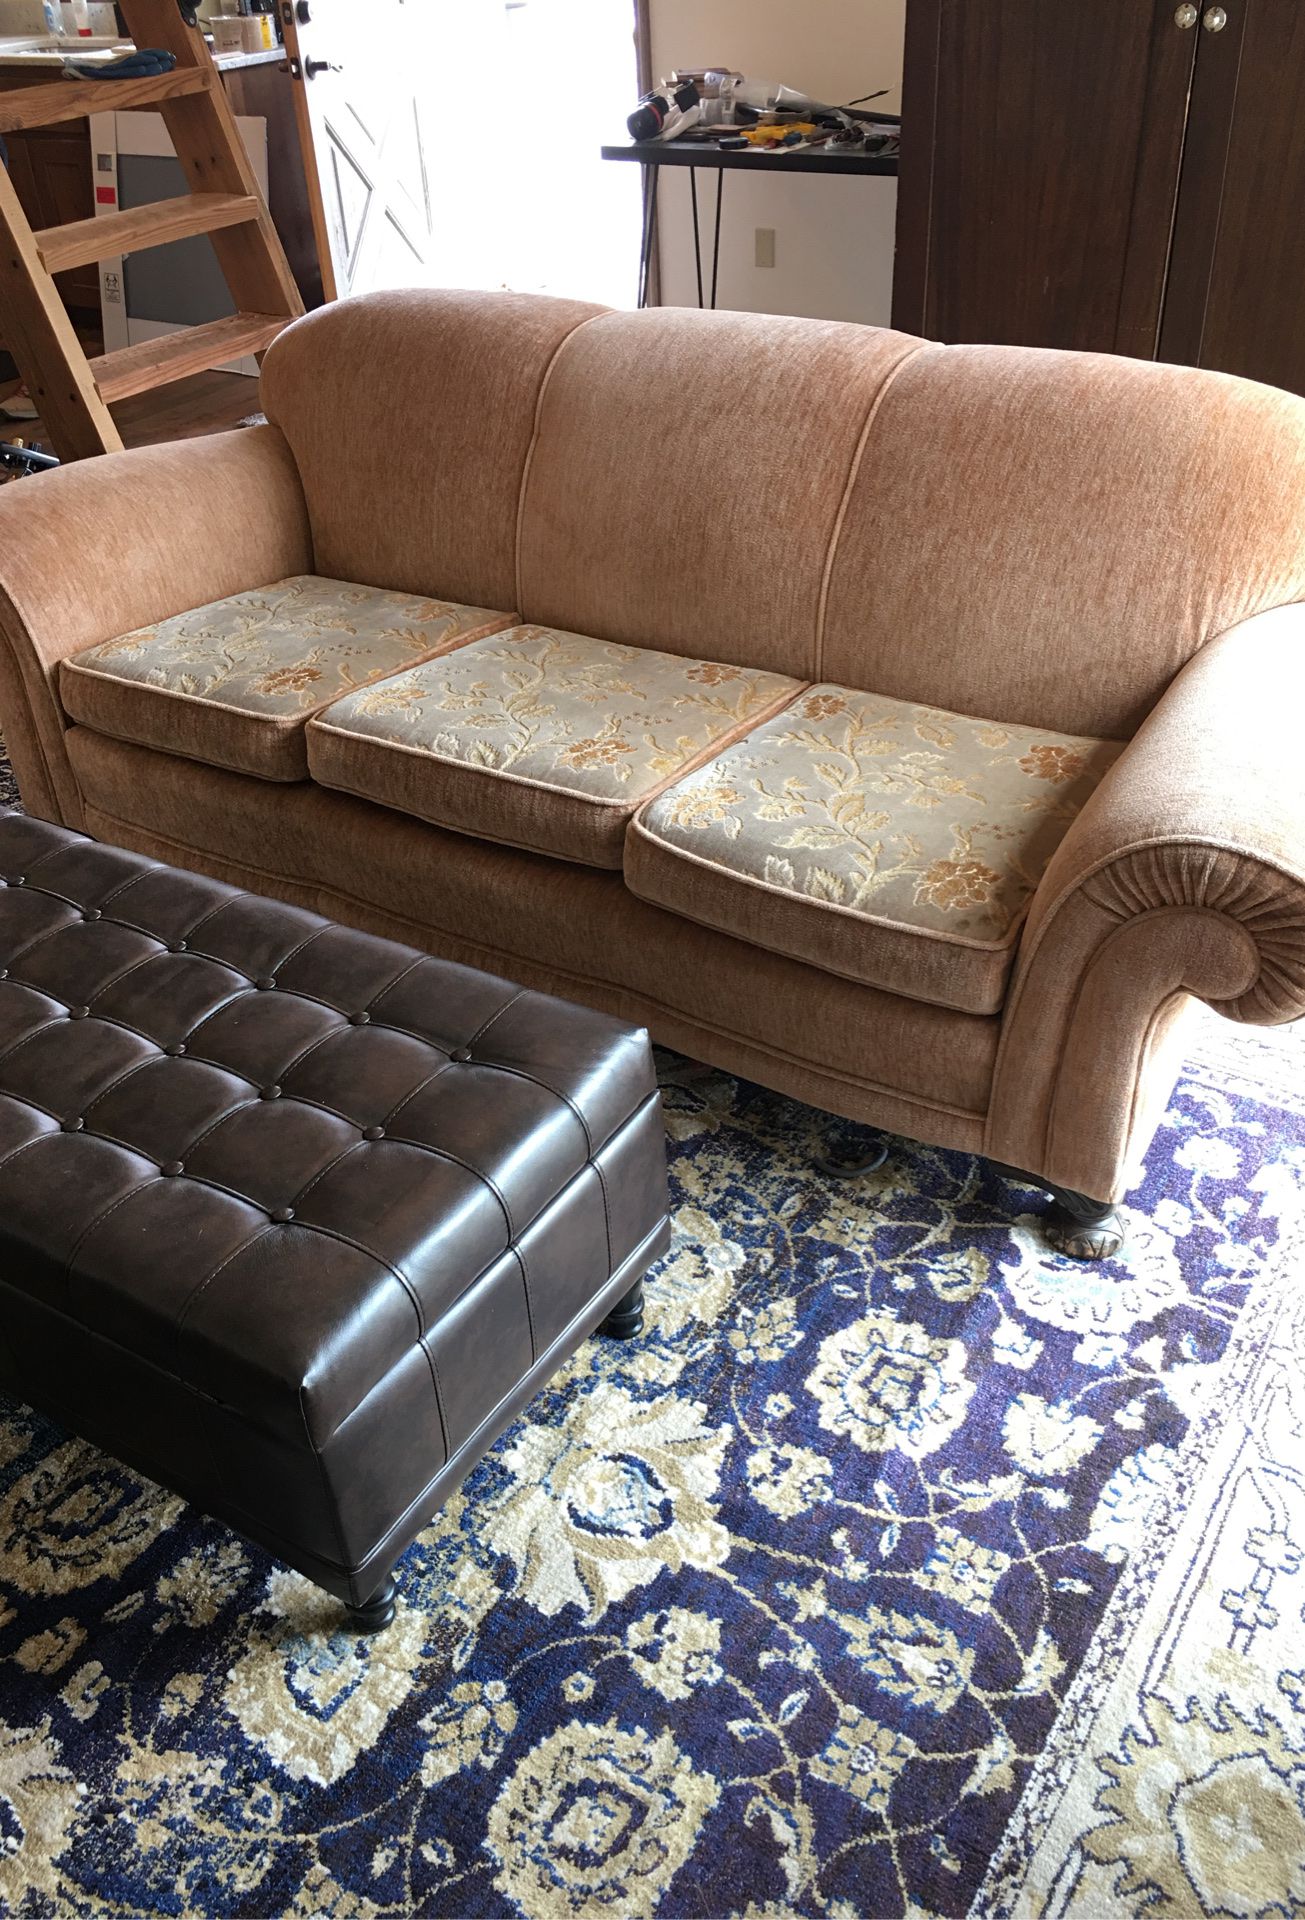 Sofa / couch and armchair set - SOFA SOLD